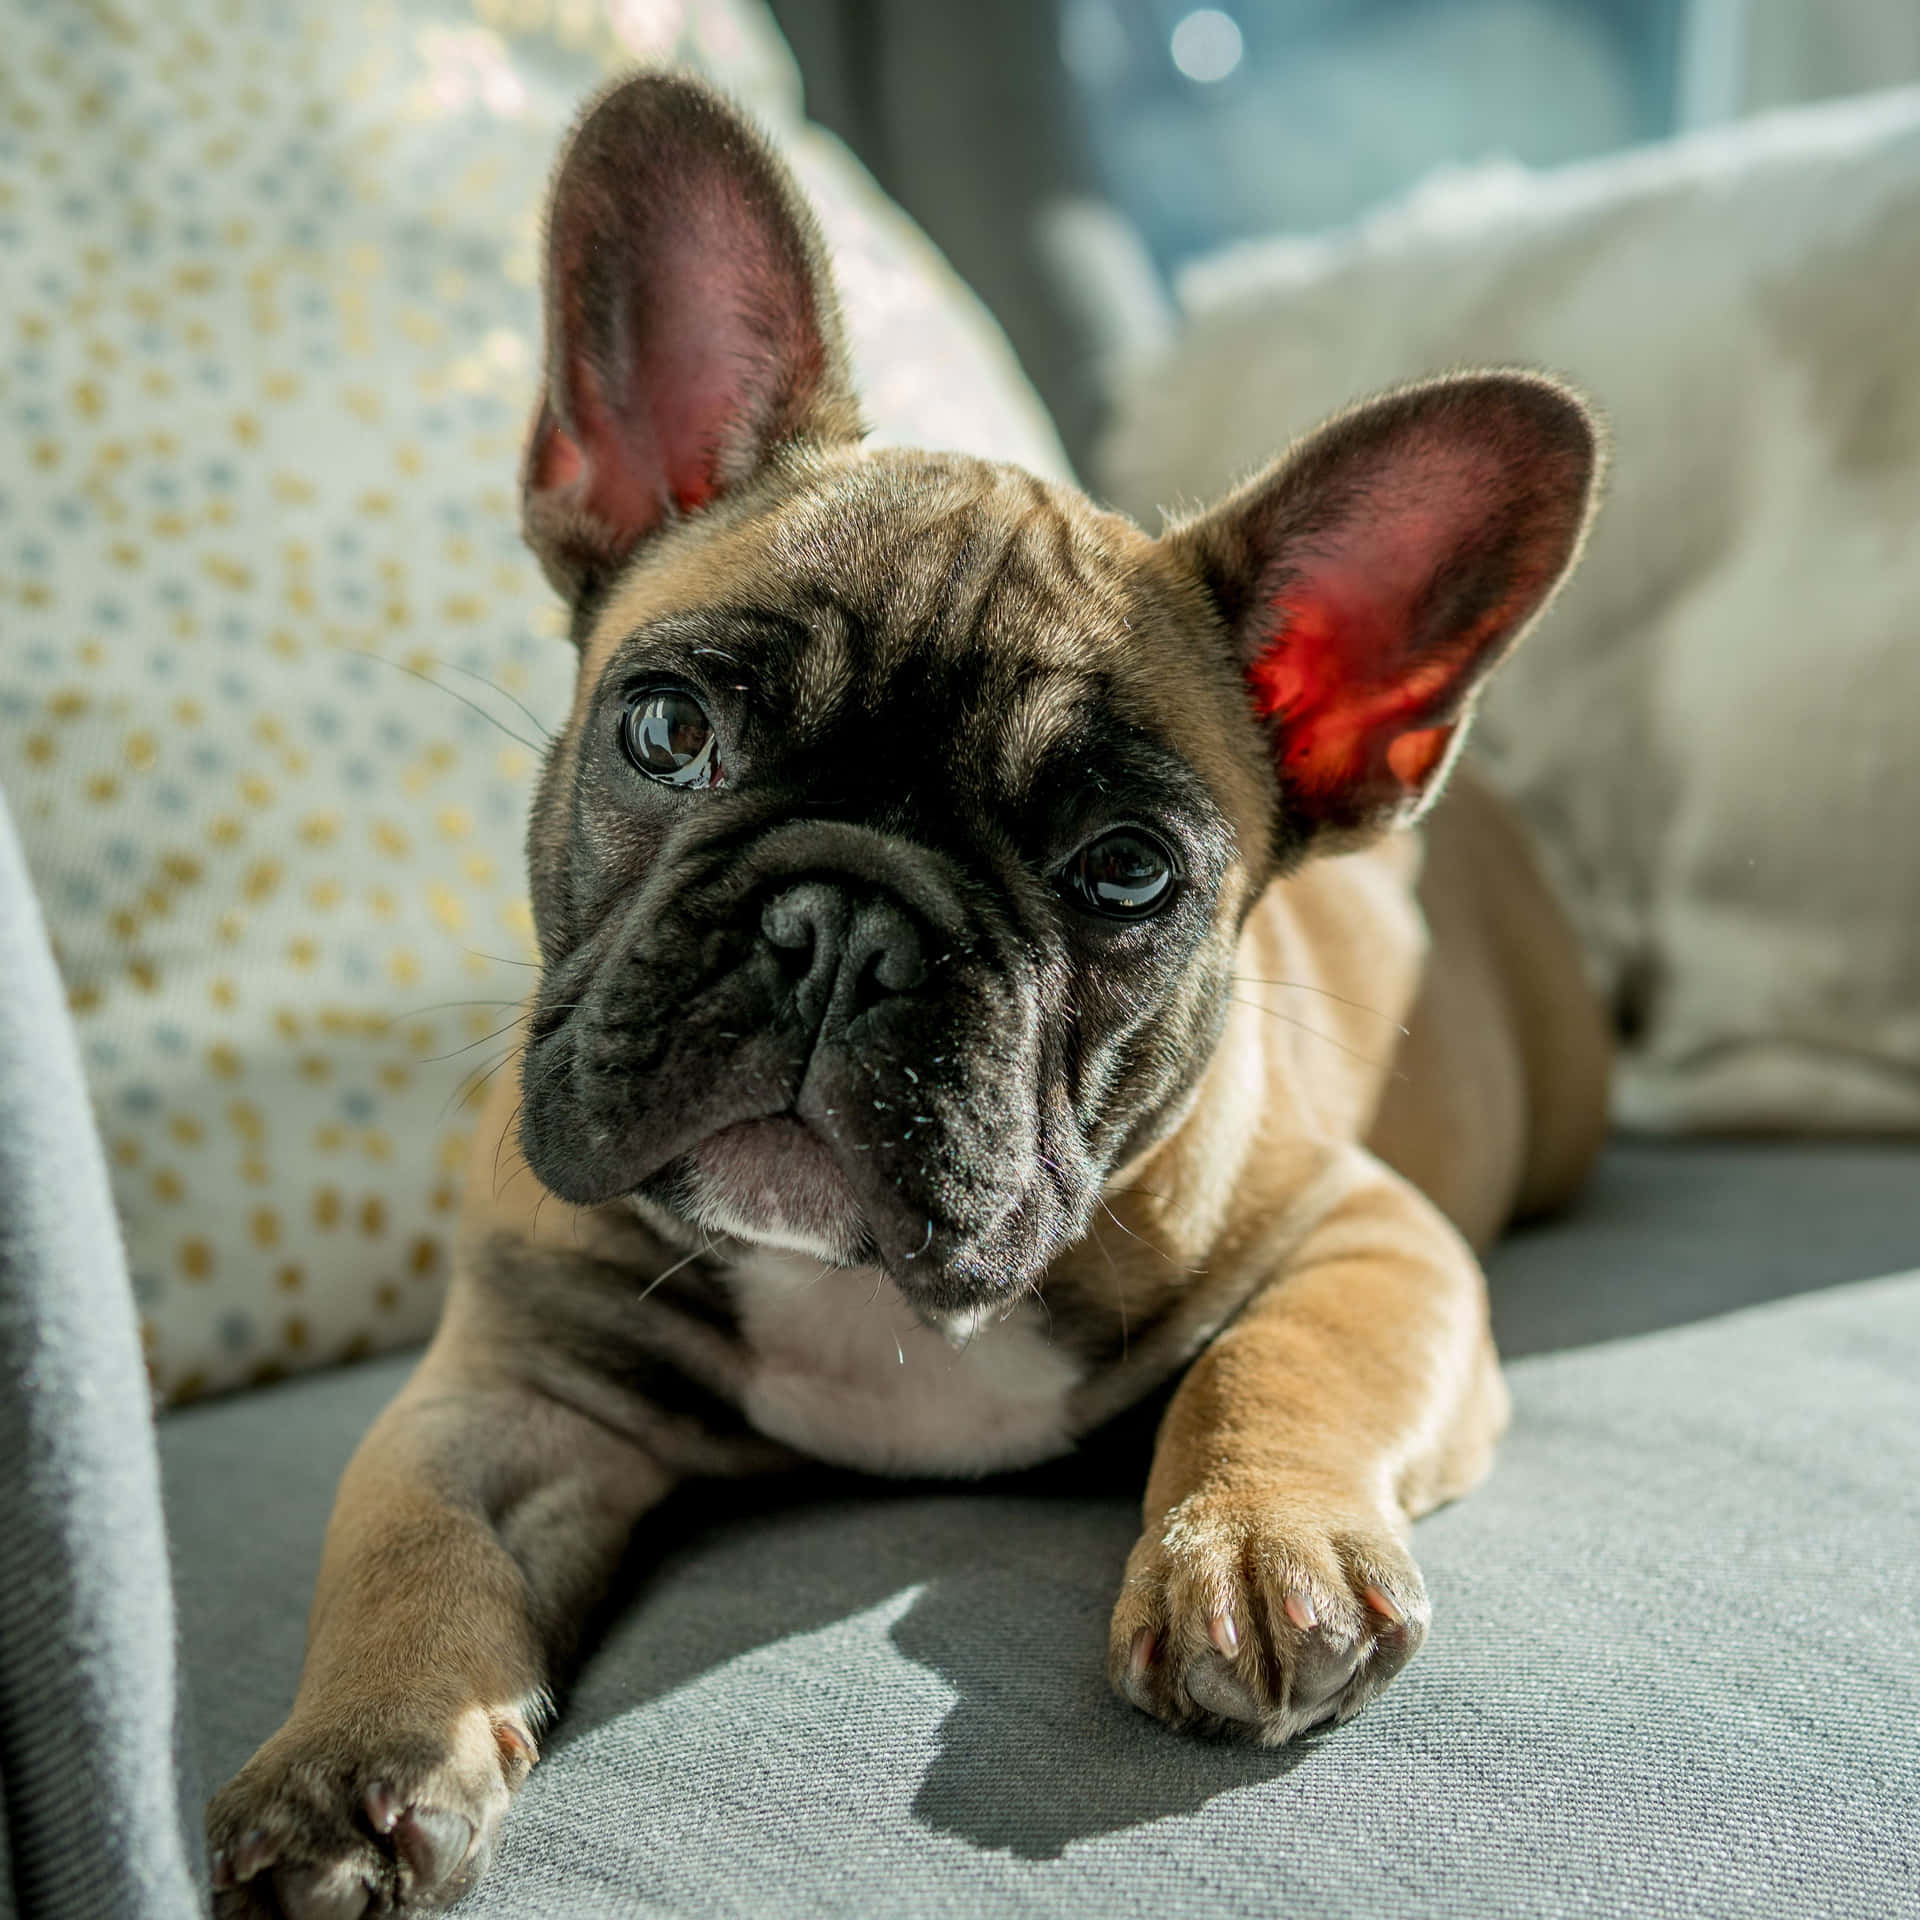 A Small French Bulldog Laying On A Couch